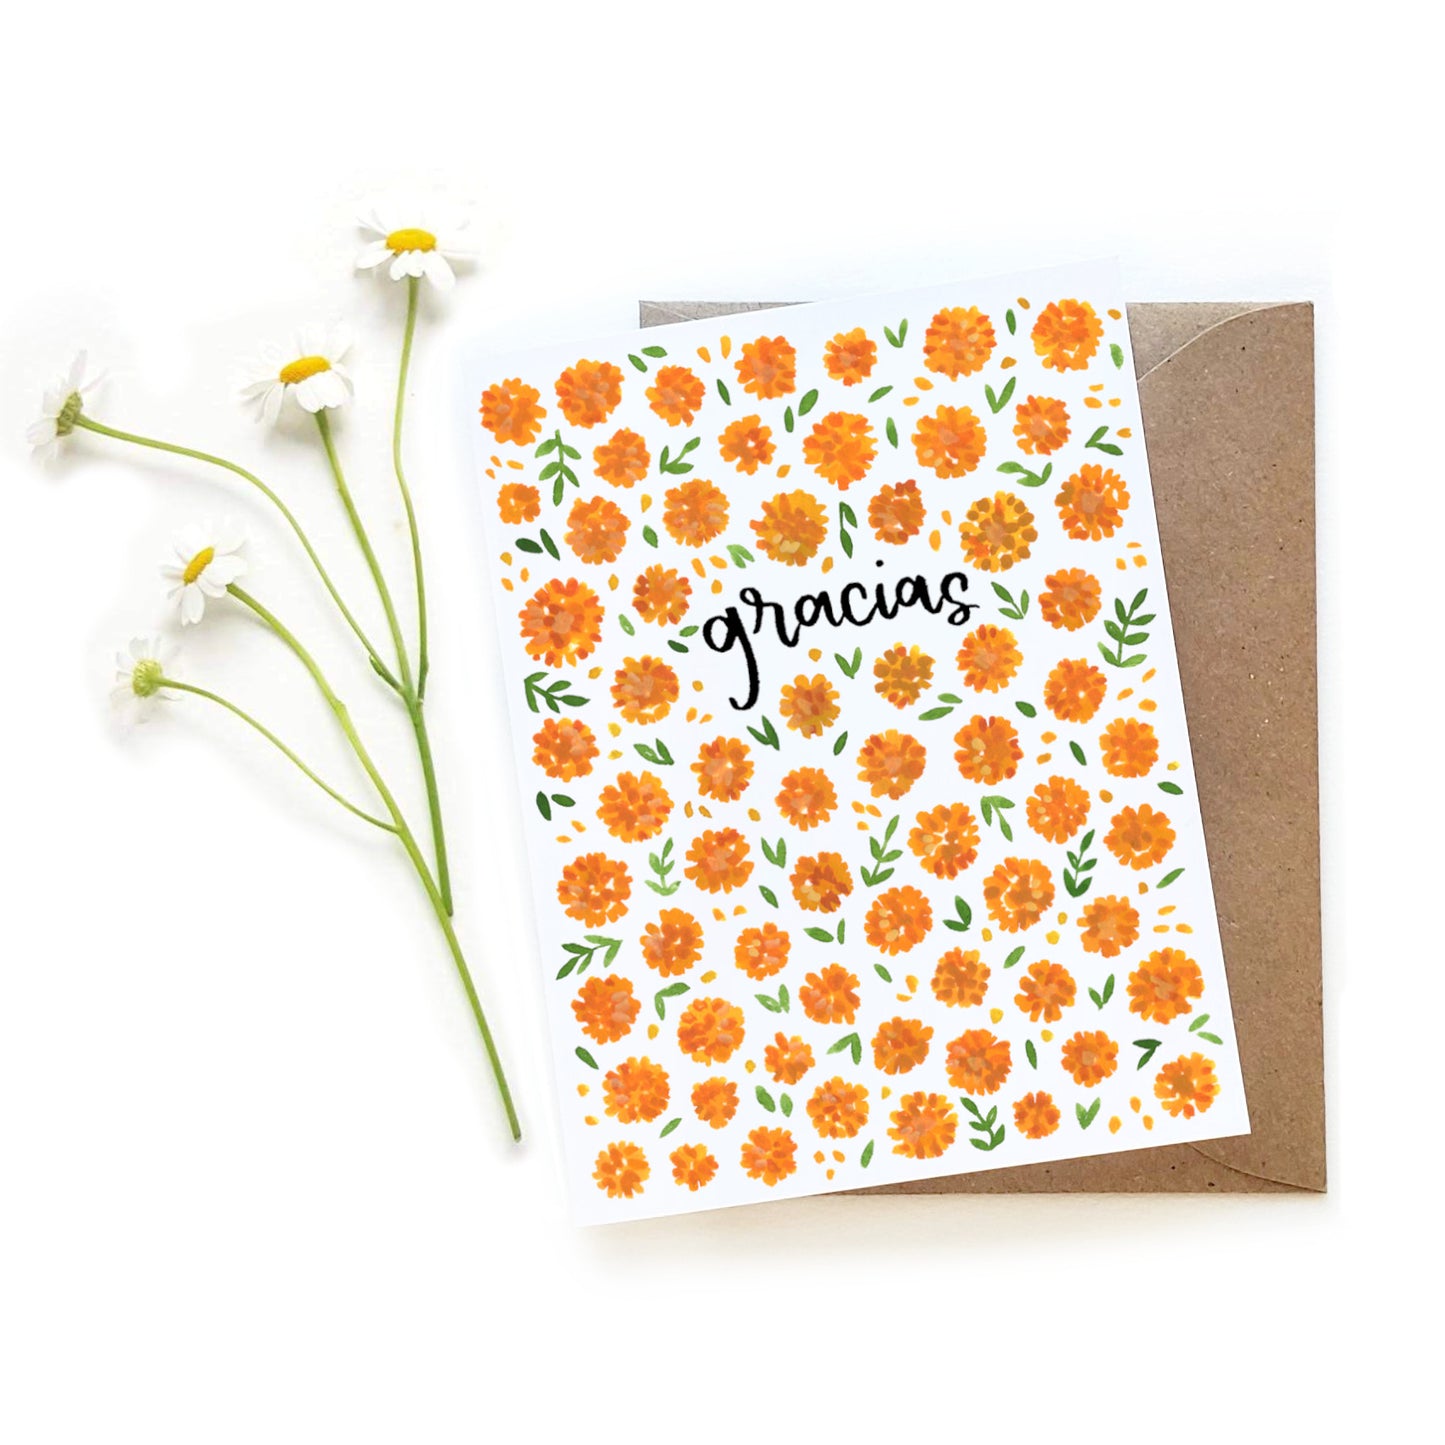 Gracias Spanish Thank You Card with Watercolor Marigolds